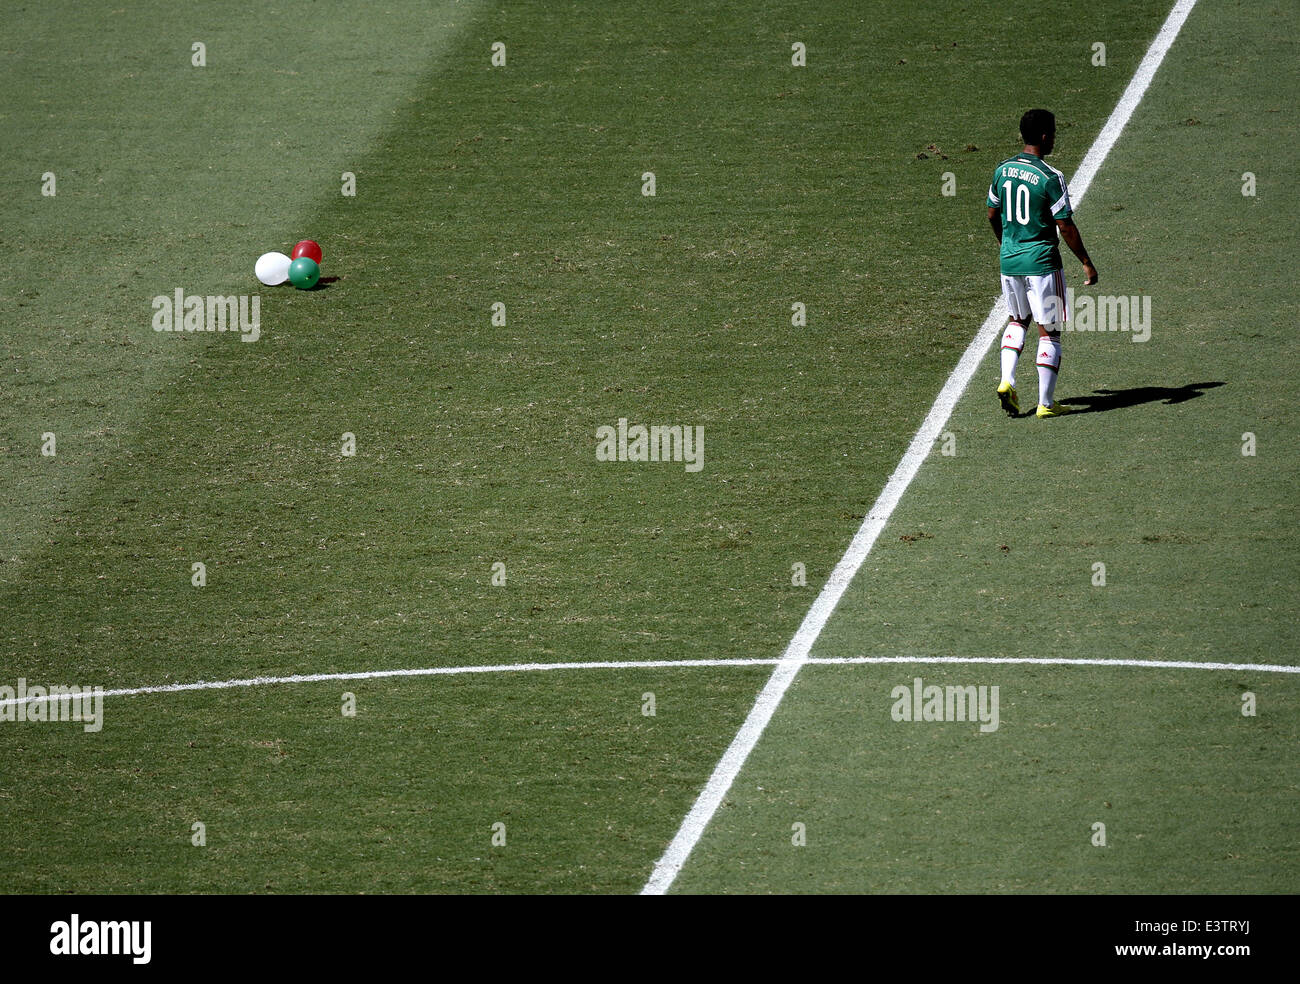 Fortaleza, Brazil. 29th June, 2014. Mexico's Giovani dos Santos is seen during a Round of 16 match between Netherlands and Mexico of 2014 FIFA World Cup at the Estadio Castelao Stadium in Fortaleza, Brazil, on June 29, 2014. Credit:  Liao Yujie/Xinhua/Alamy Live News Stock Photo